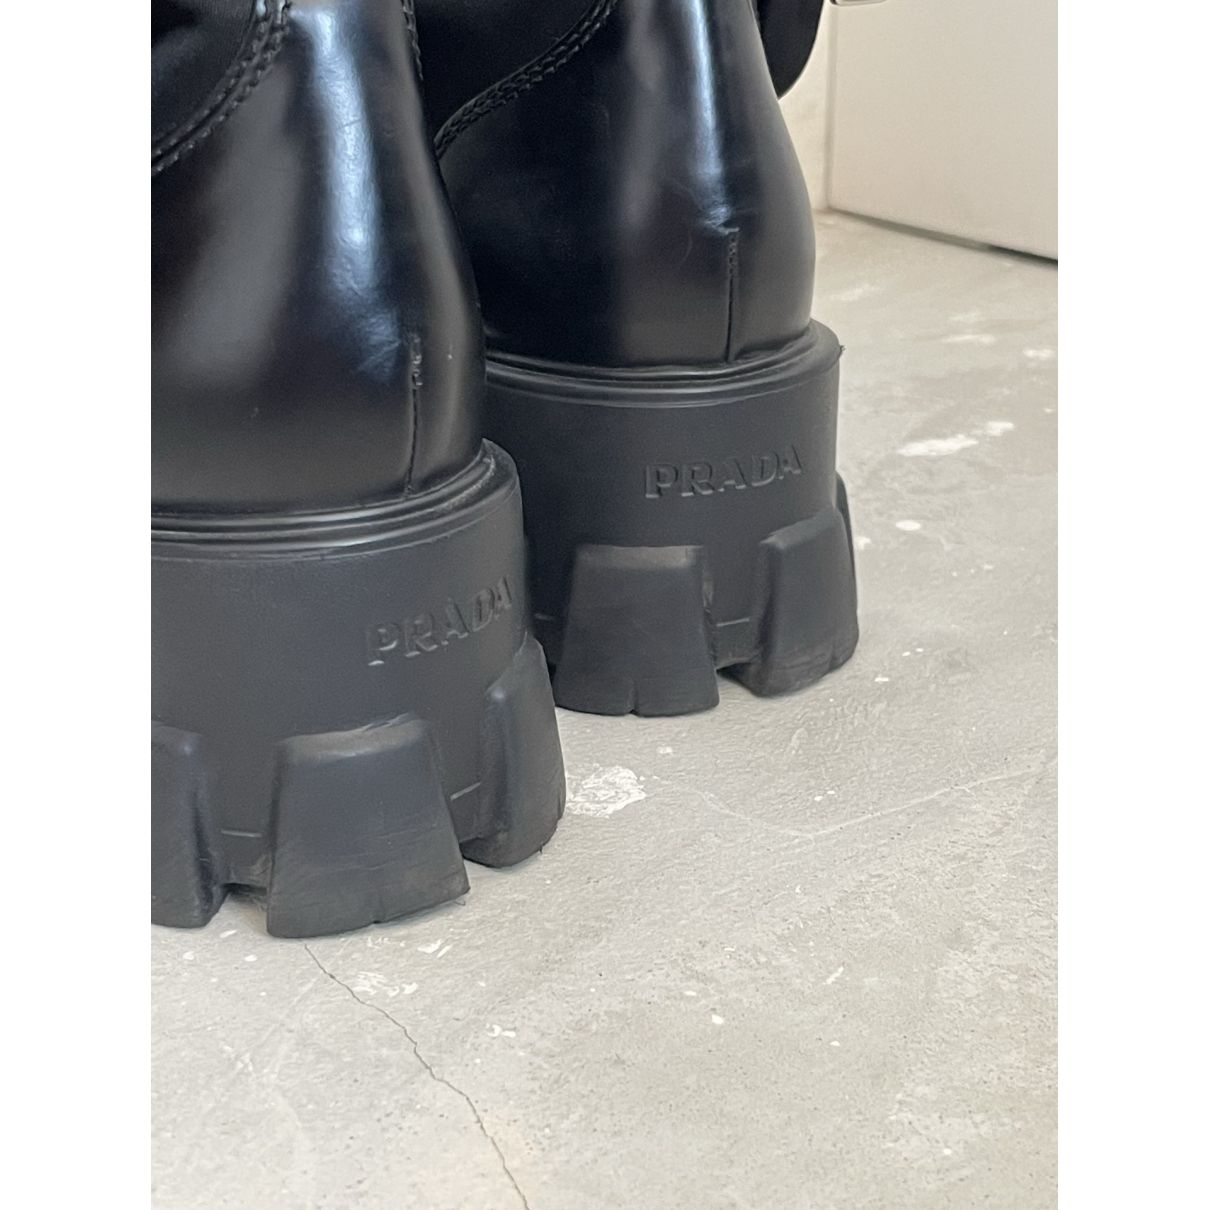 Monolith leather boots Prada Black size 37 EU in Leather - 25630220